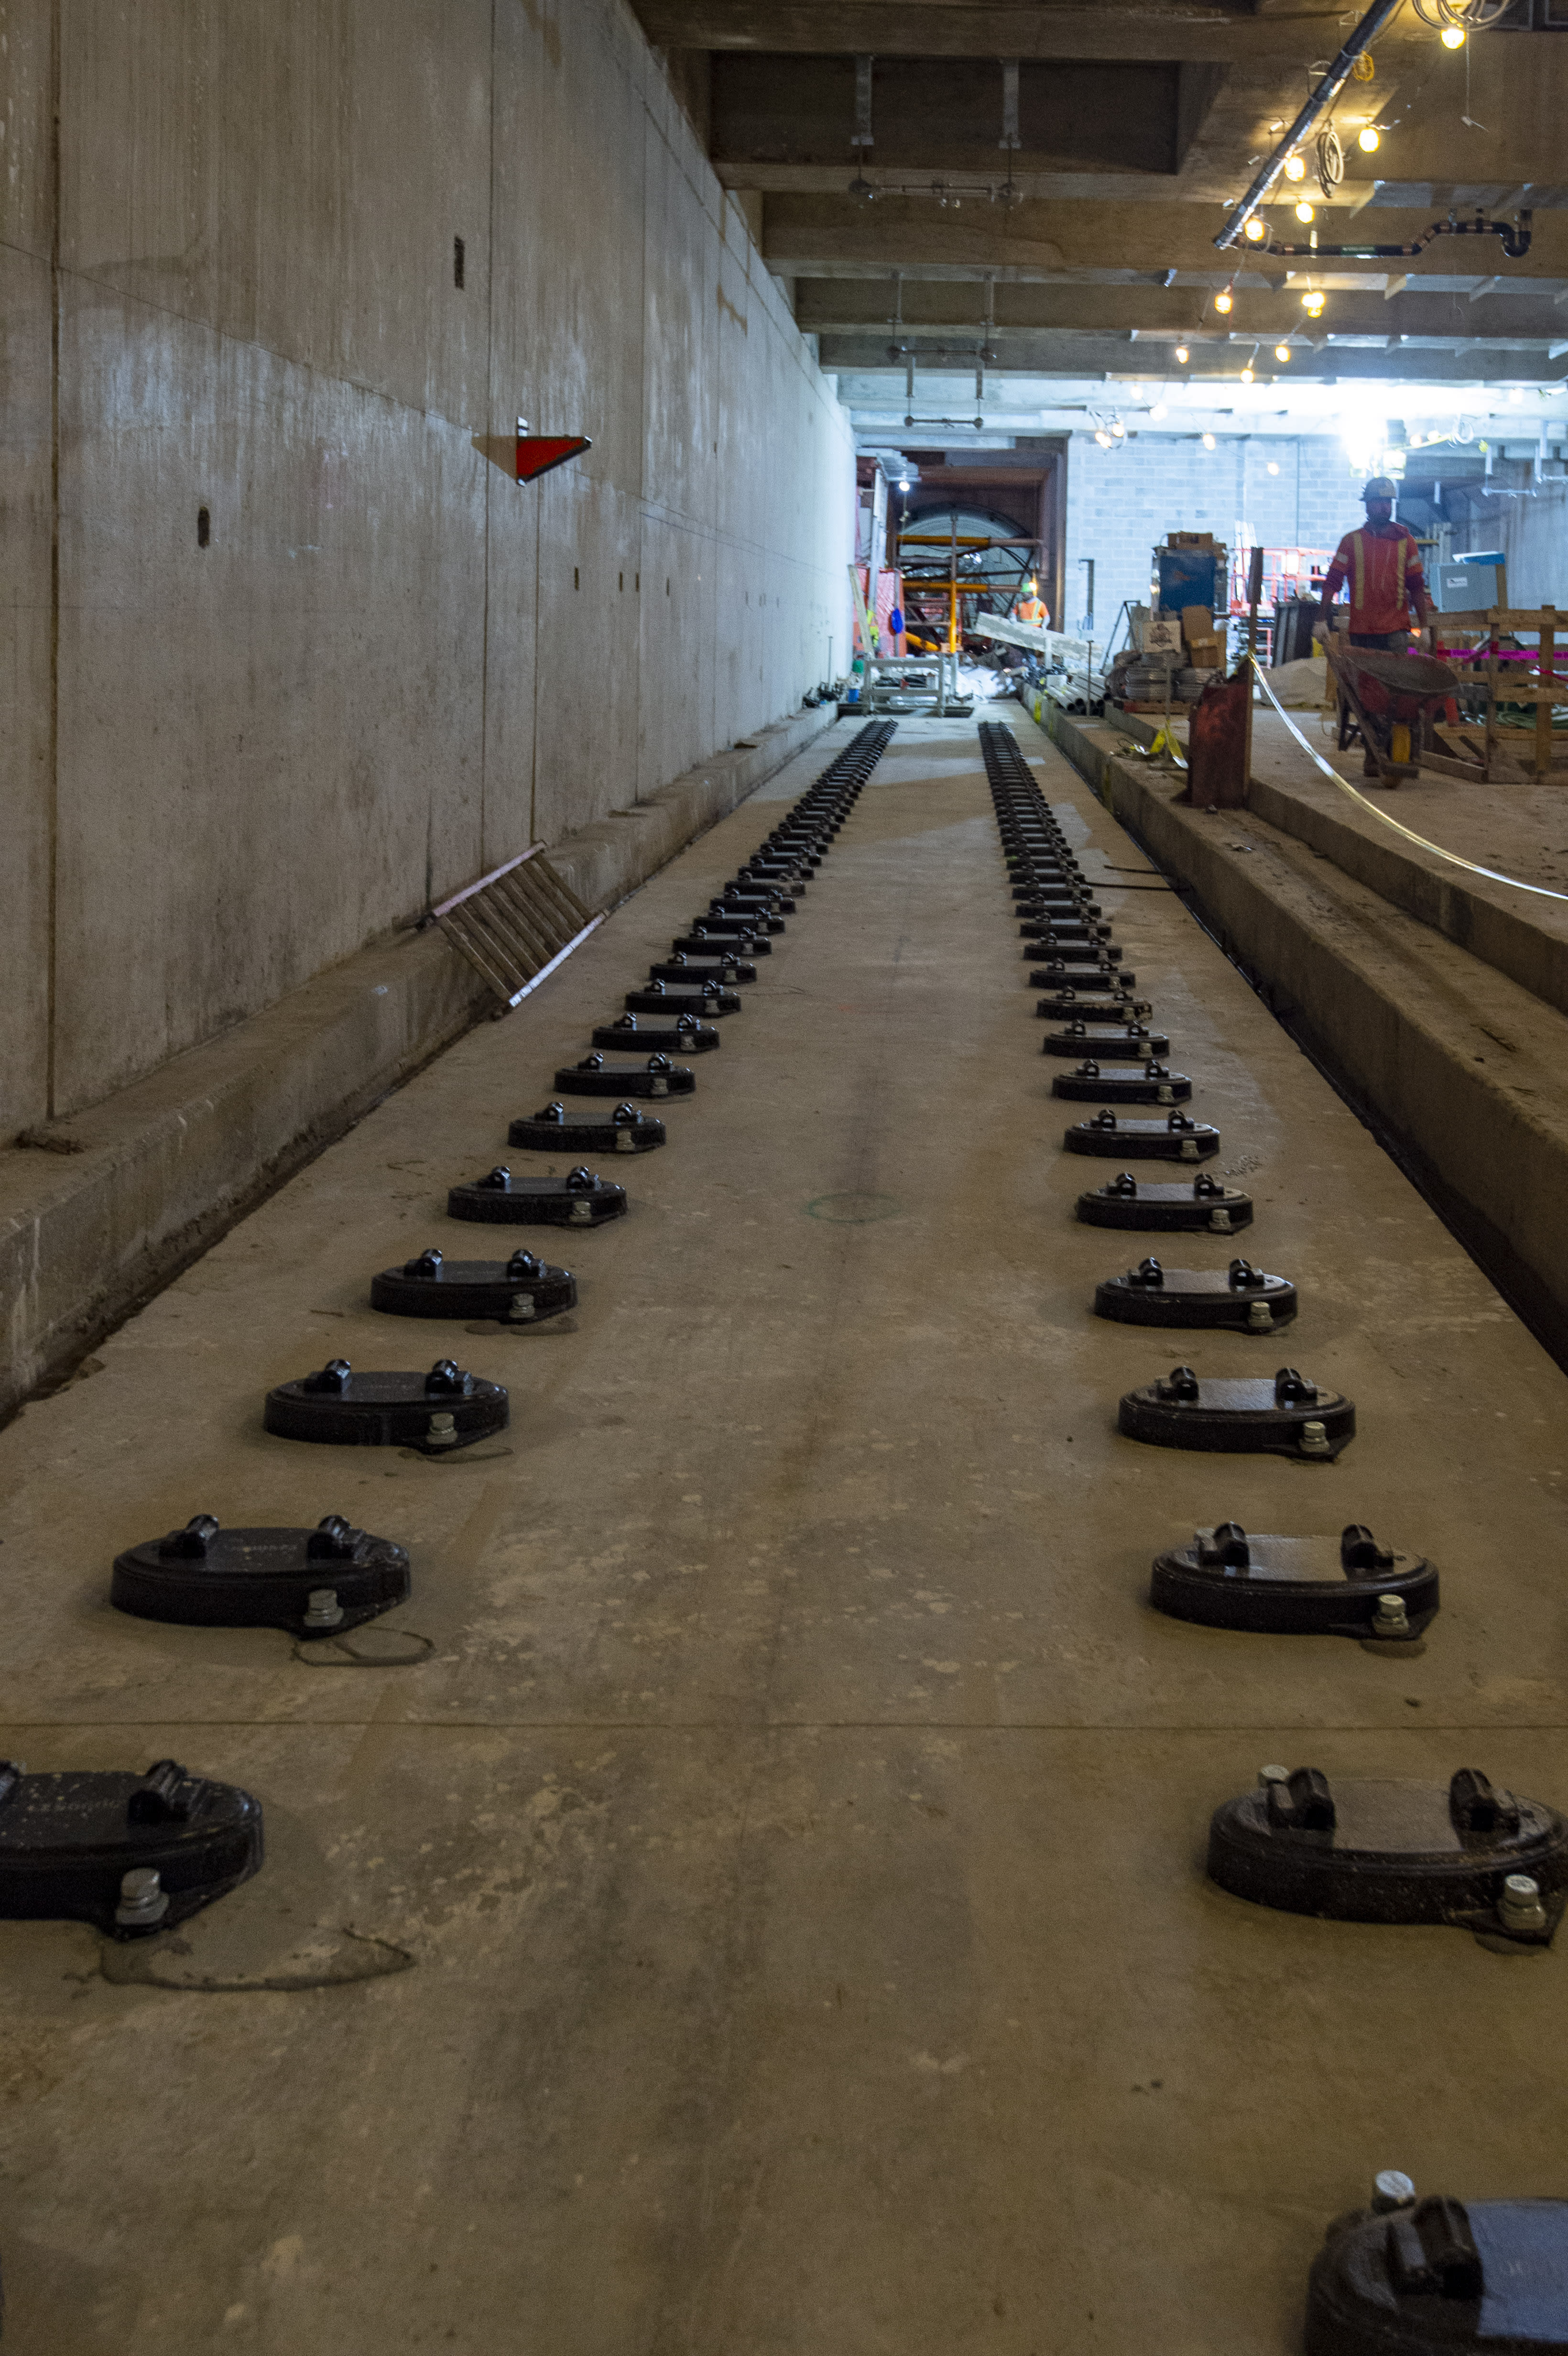 A line of track pads is shown.